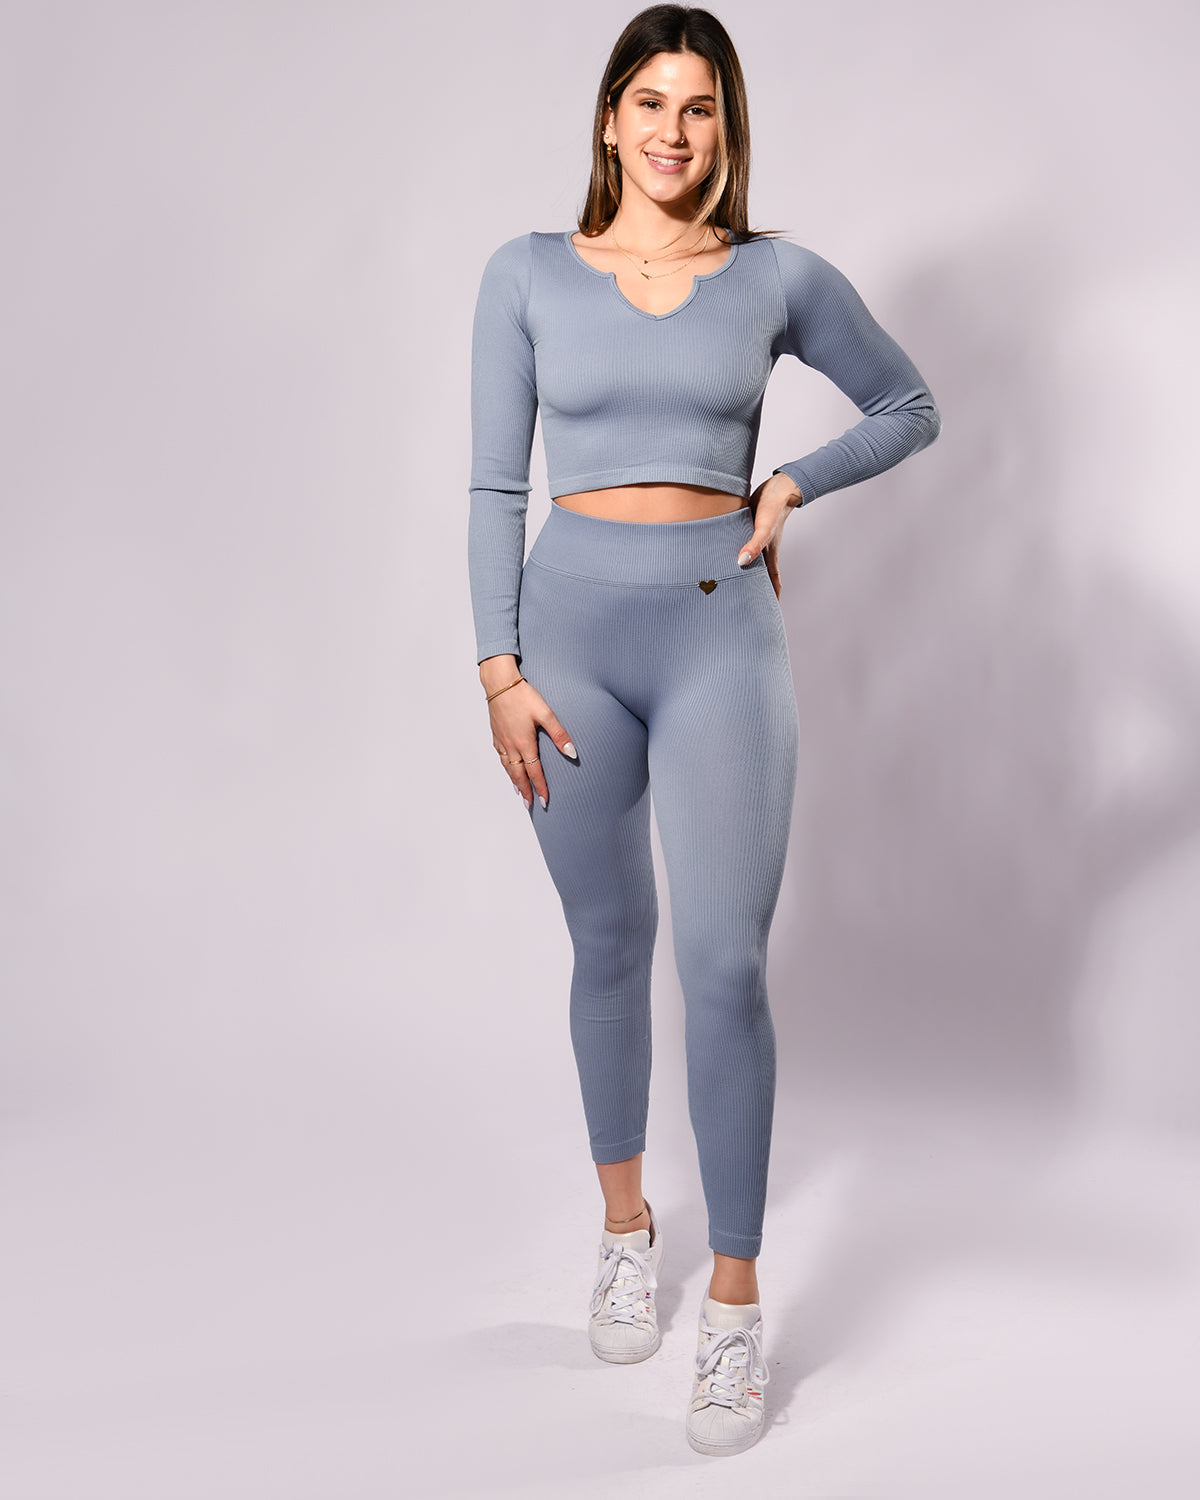 Get it Together* (Rib High Waist Leggings) by Cute Booty Lounge